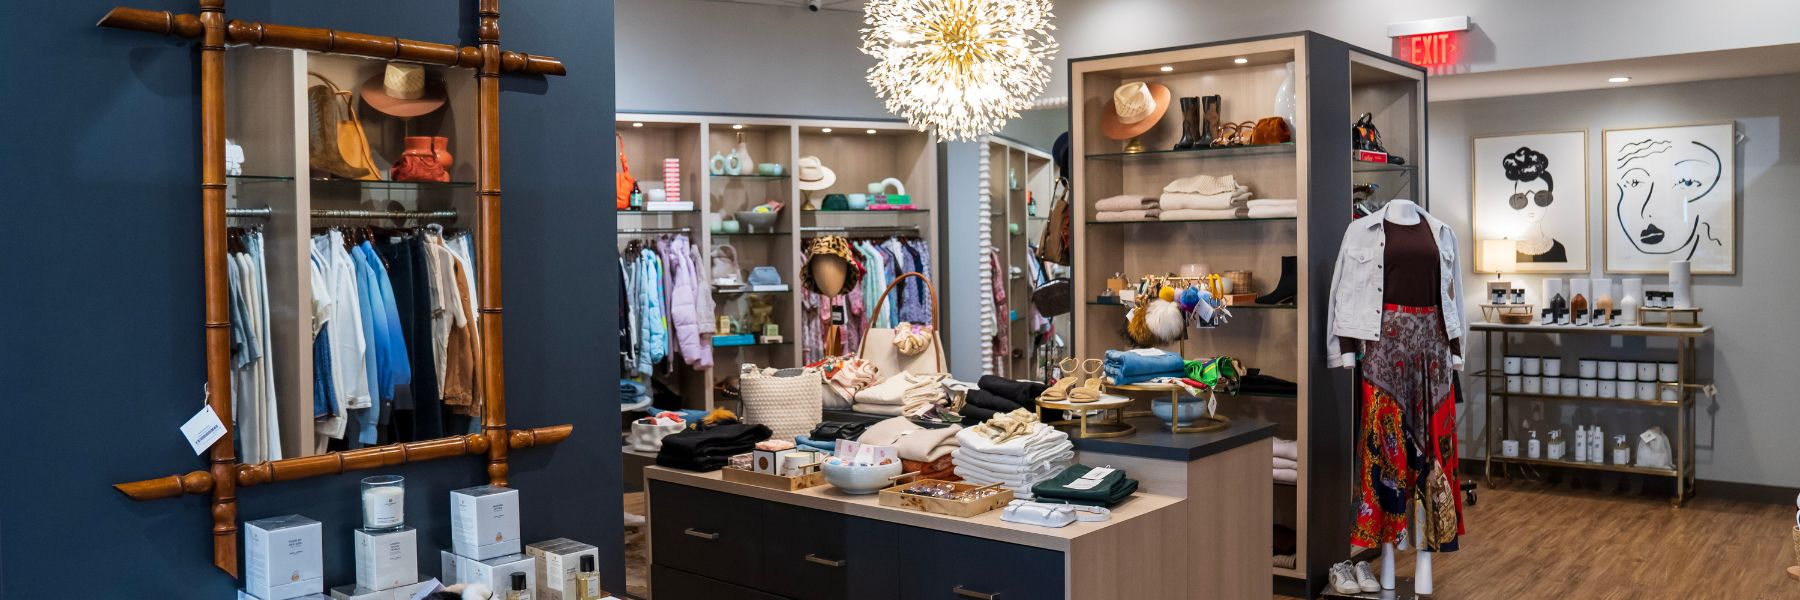 In St. Louis, Hearth & Soul boasts a closet of women's apparel and accessories where you can go shopping.